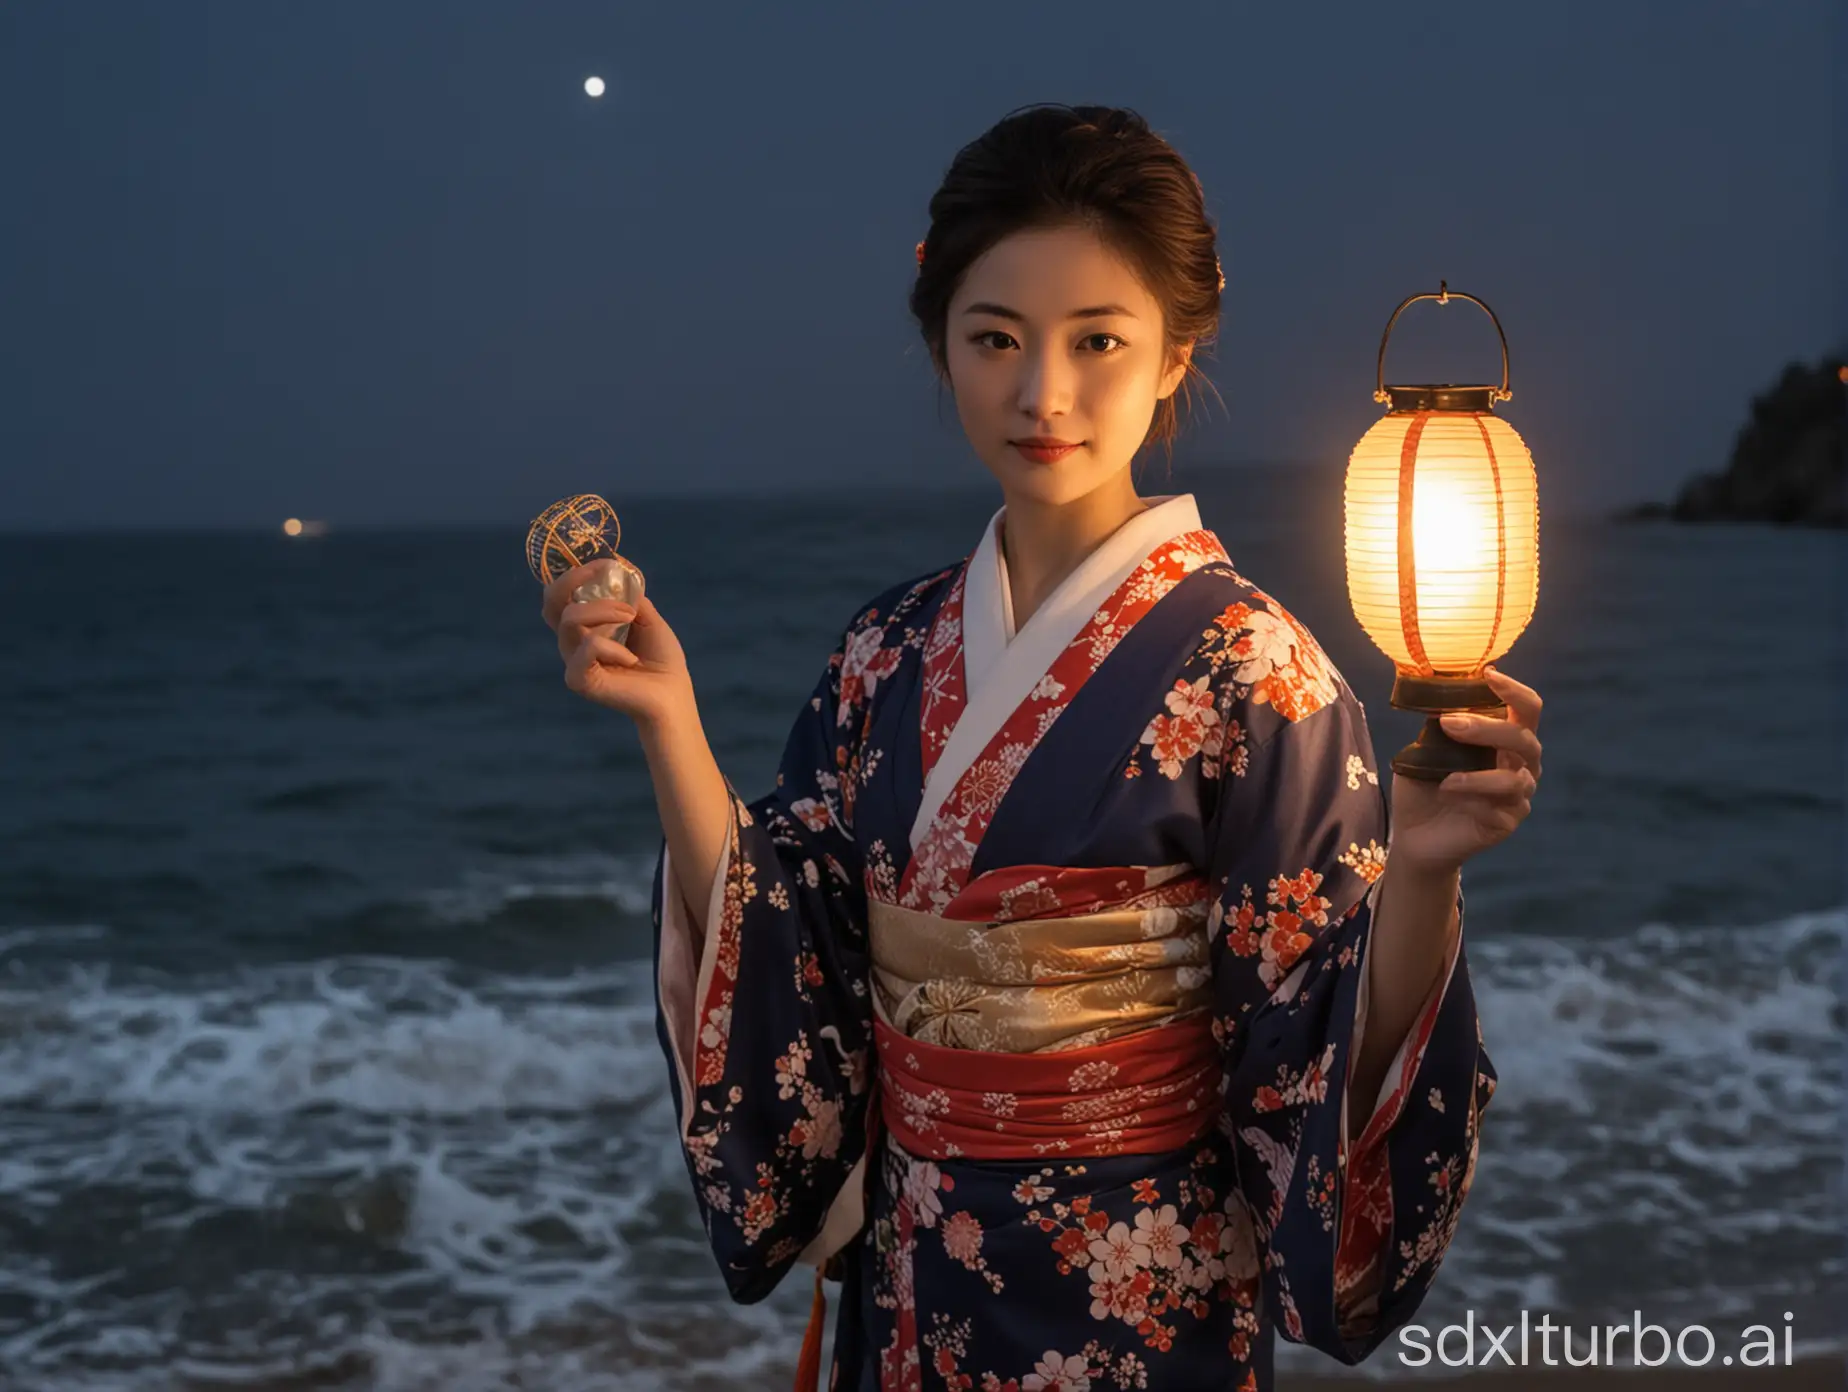 Woman-in-Kimono-Holding-Lamp-by-the-Sea-at-Night